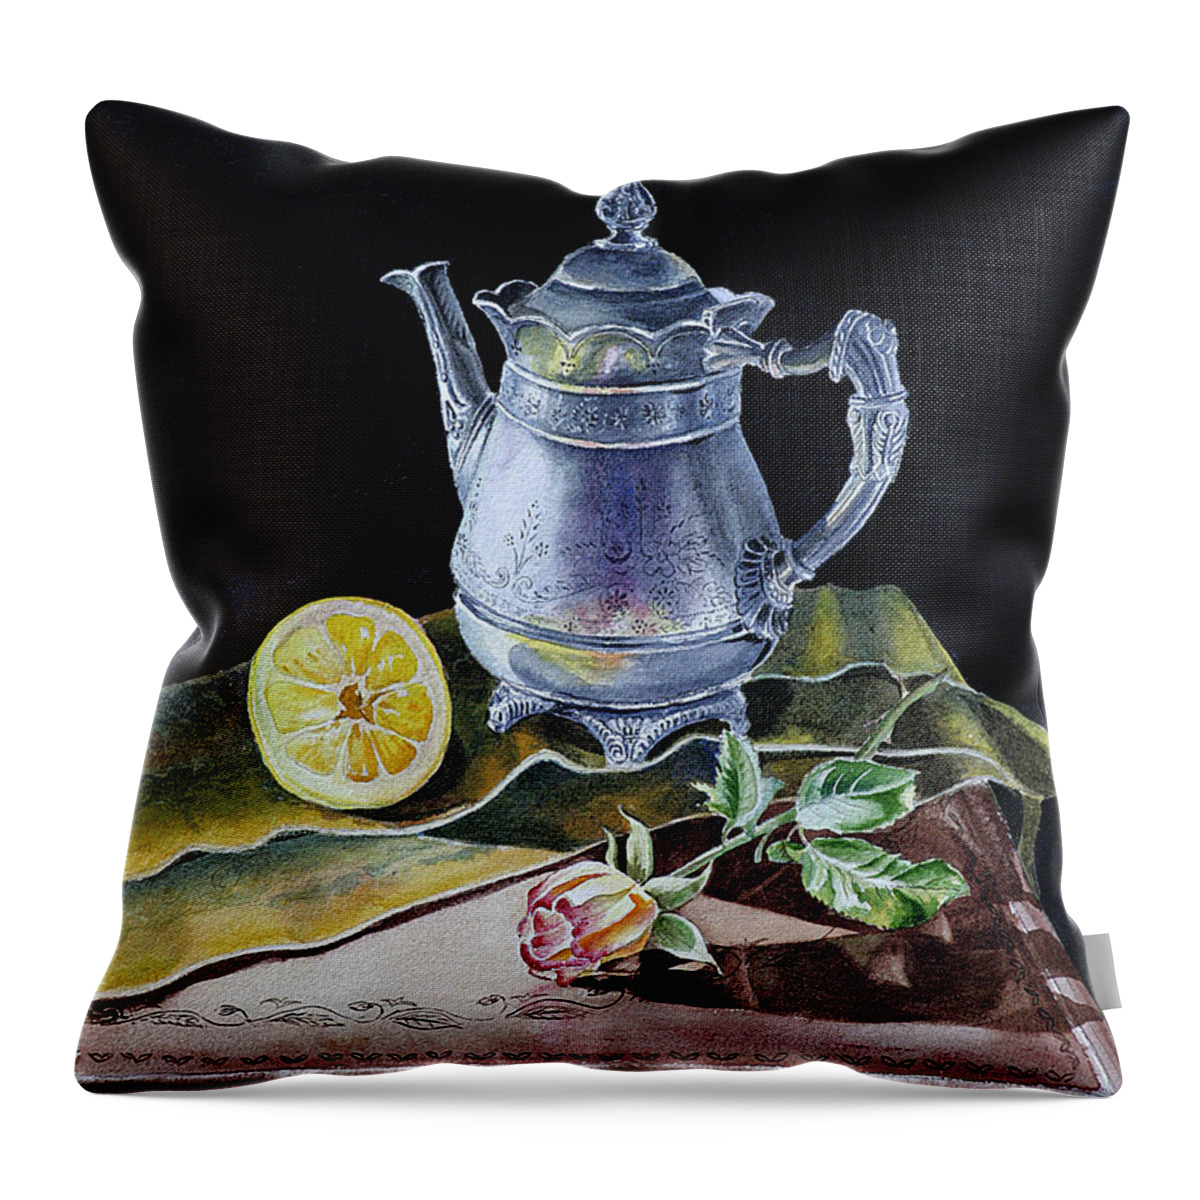 Best Throw Pillow featuring the painting Still Life With Lemon And Rose by Irina Sztukowski